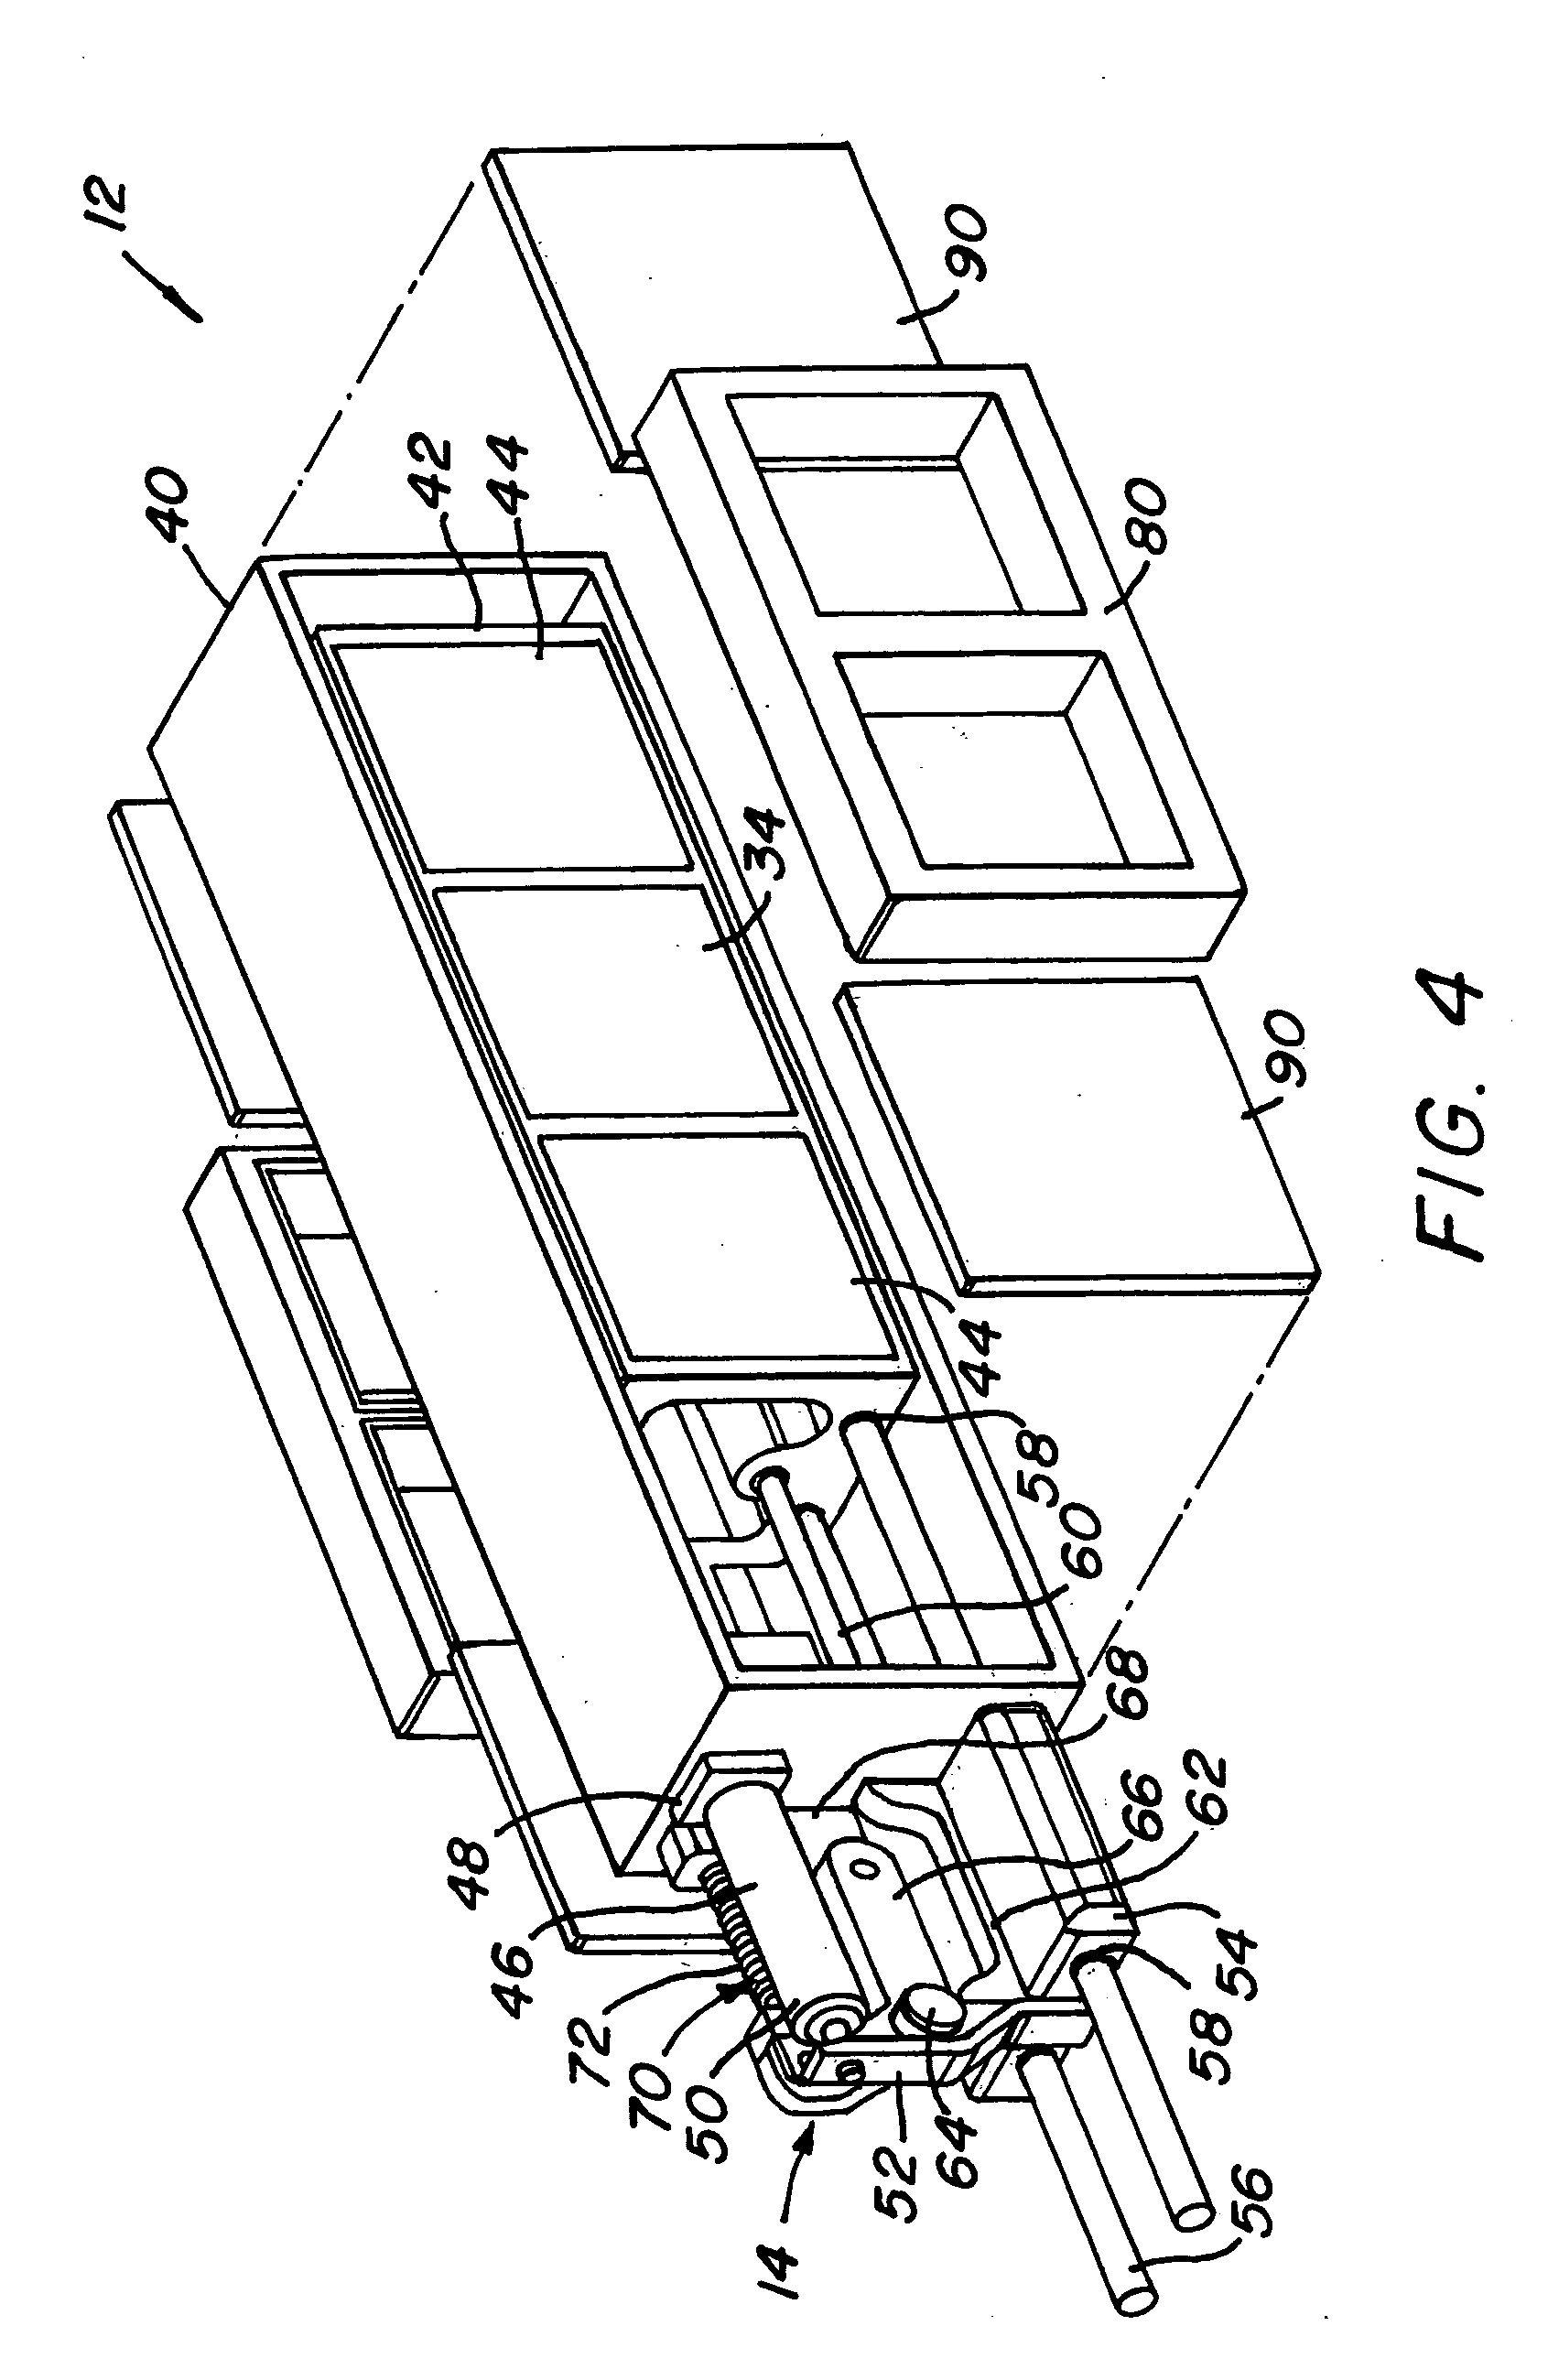 Variable area mass or area and mass species transfer device and method